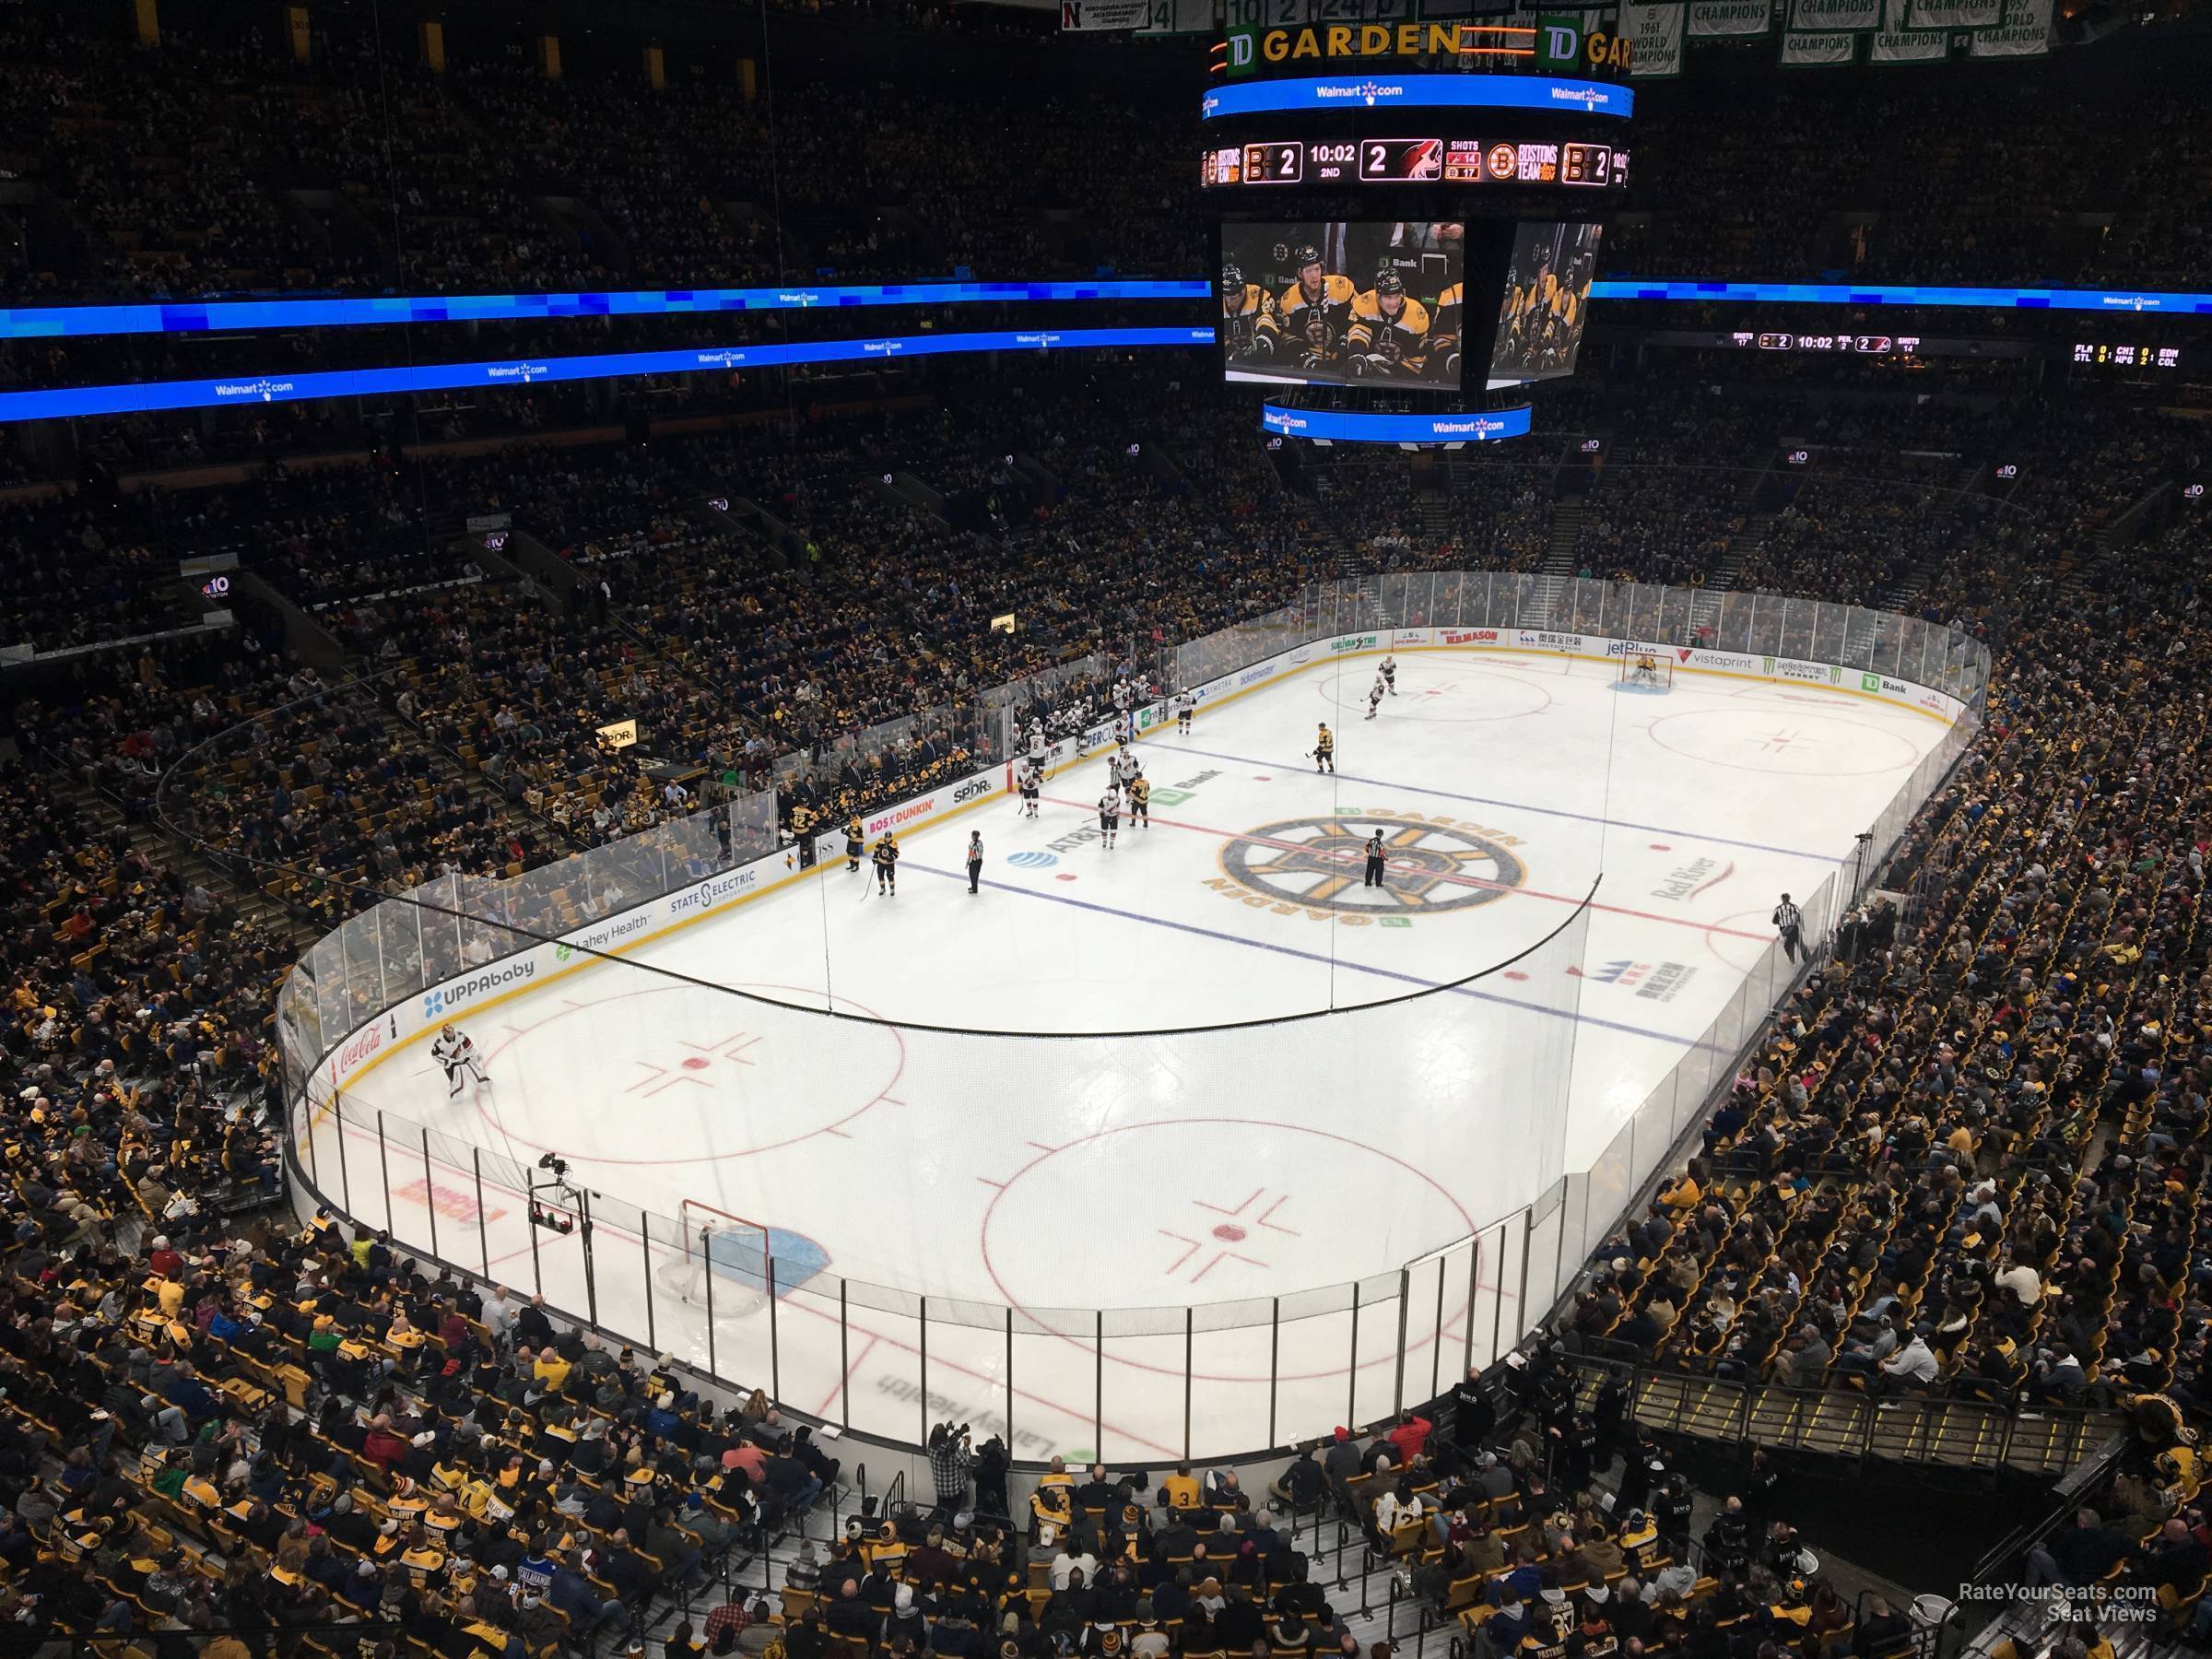 section 321, row 3 seat view  for hockey - td garden